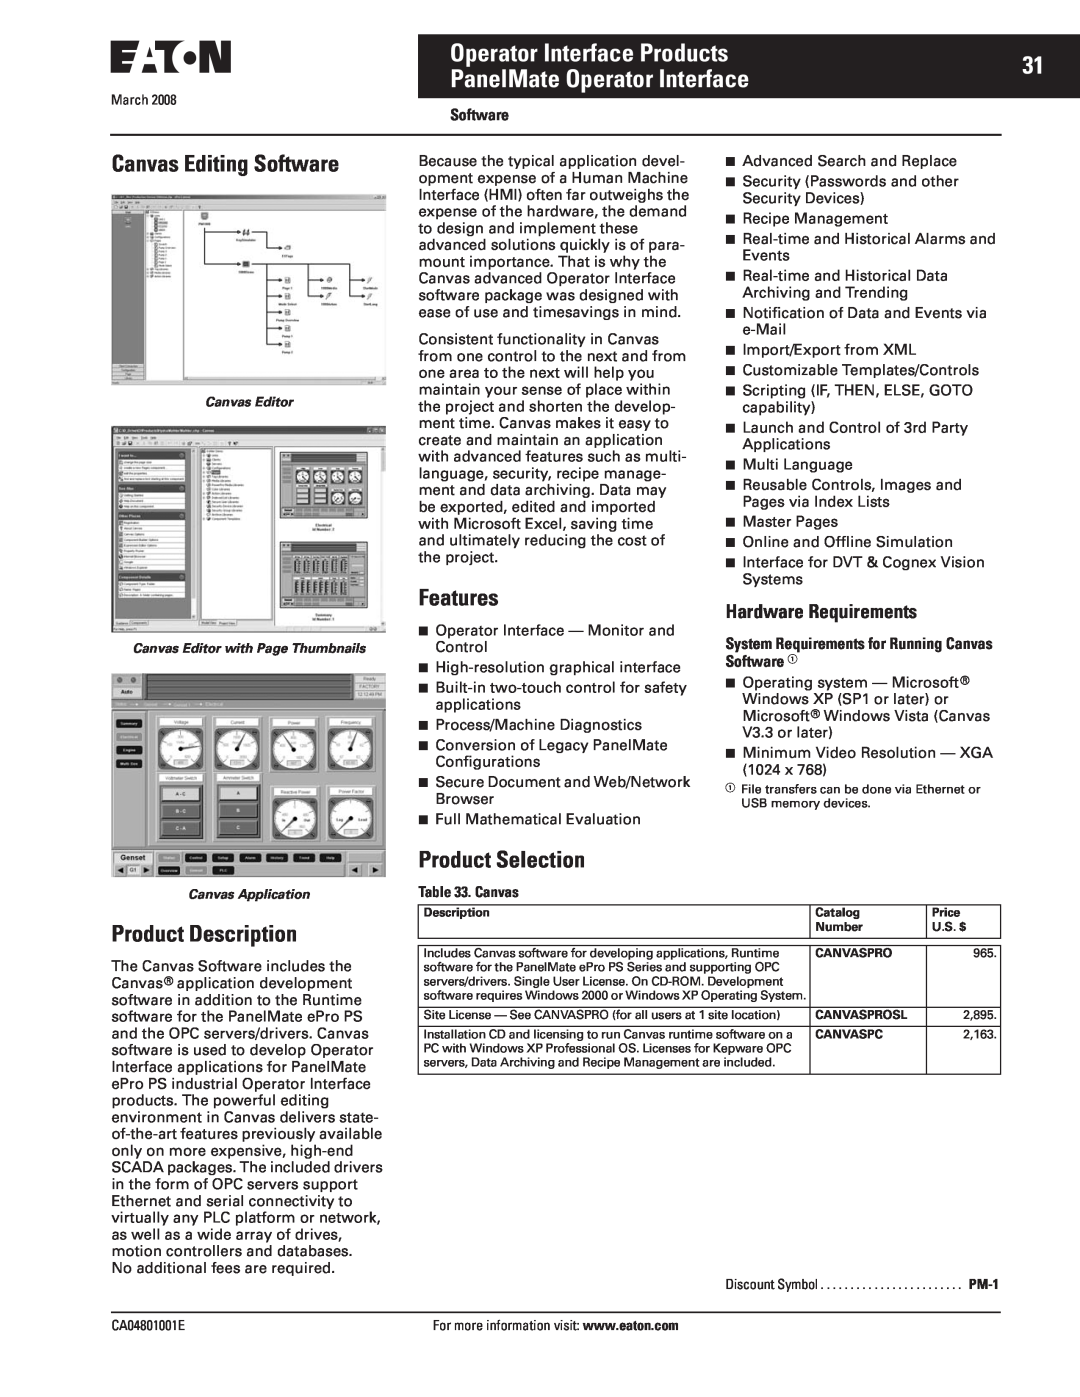 Eaton Electrical CA04801001E Canvas Editing Software, Hardware Requirements, Operator Interface Products, Features, March 